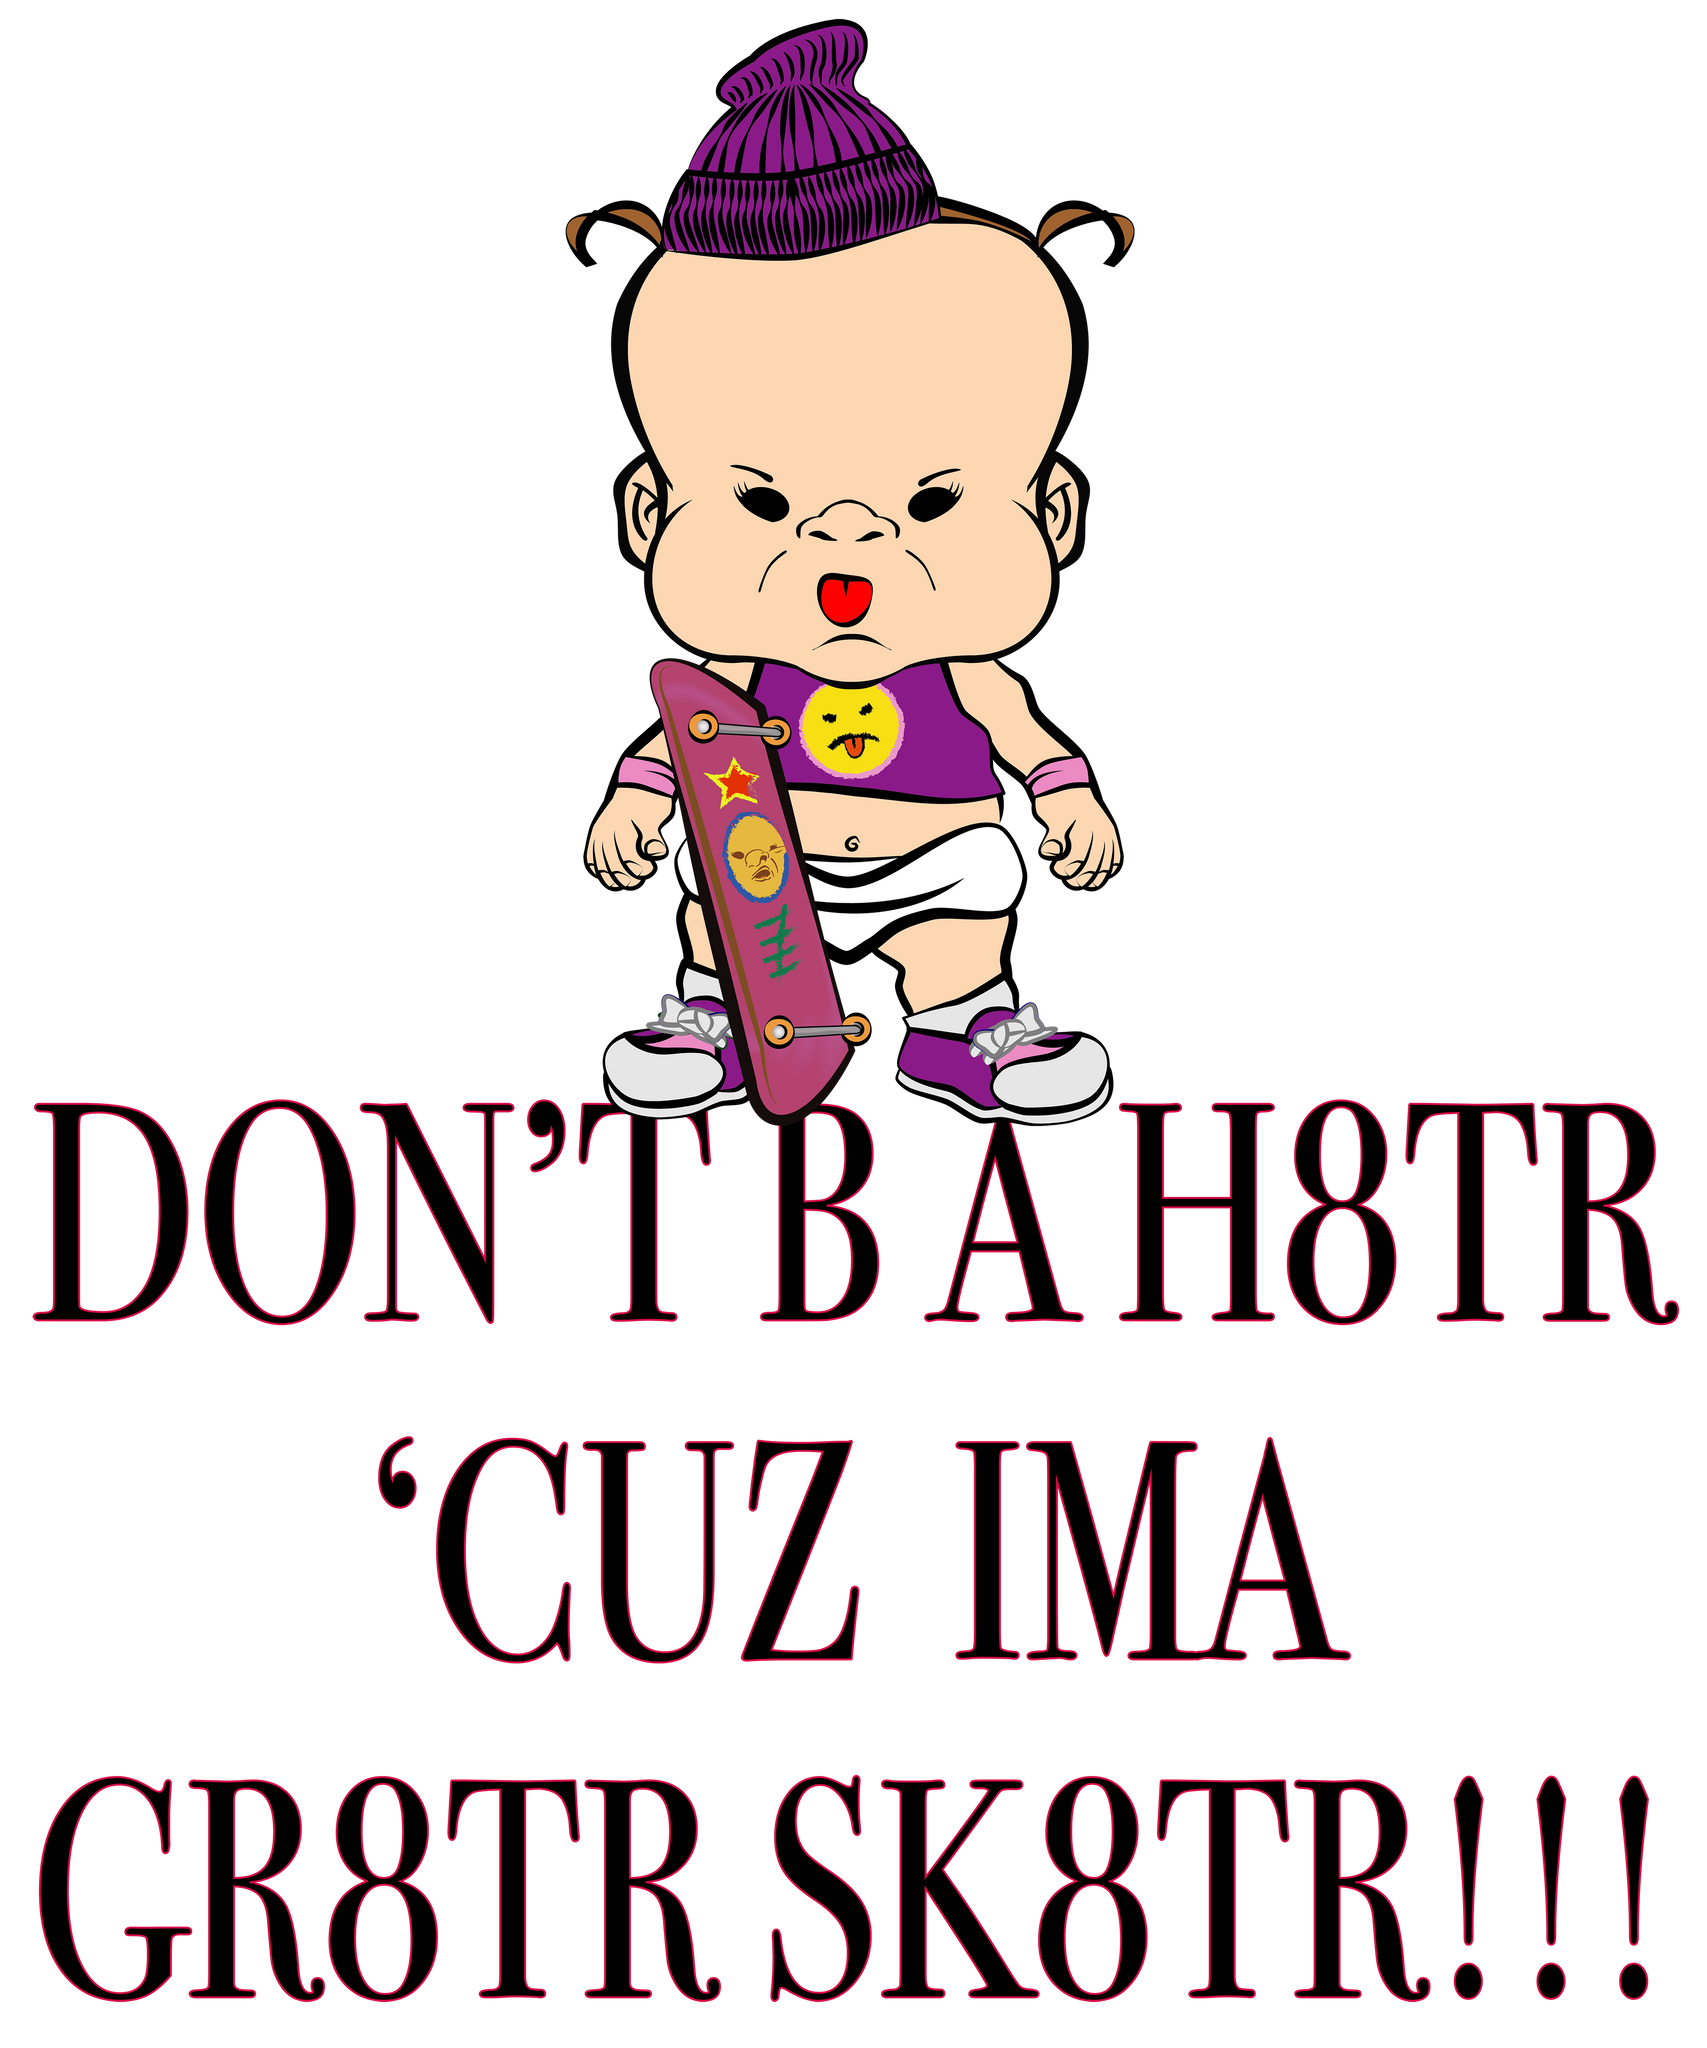 PBTZ1000_Skaterz_don't be a h8tr_girl_3